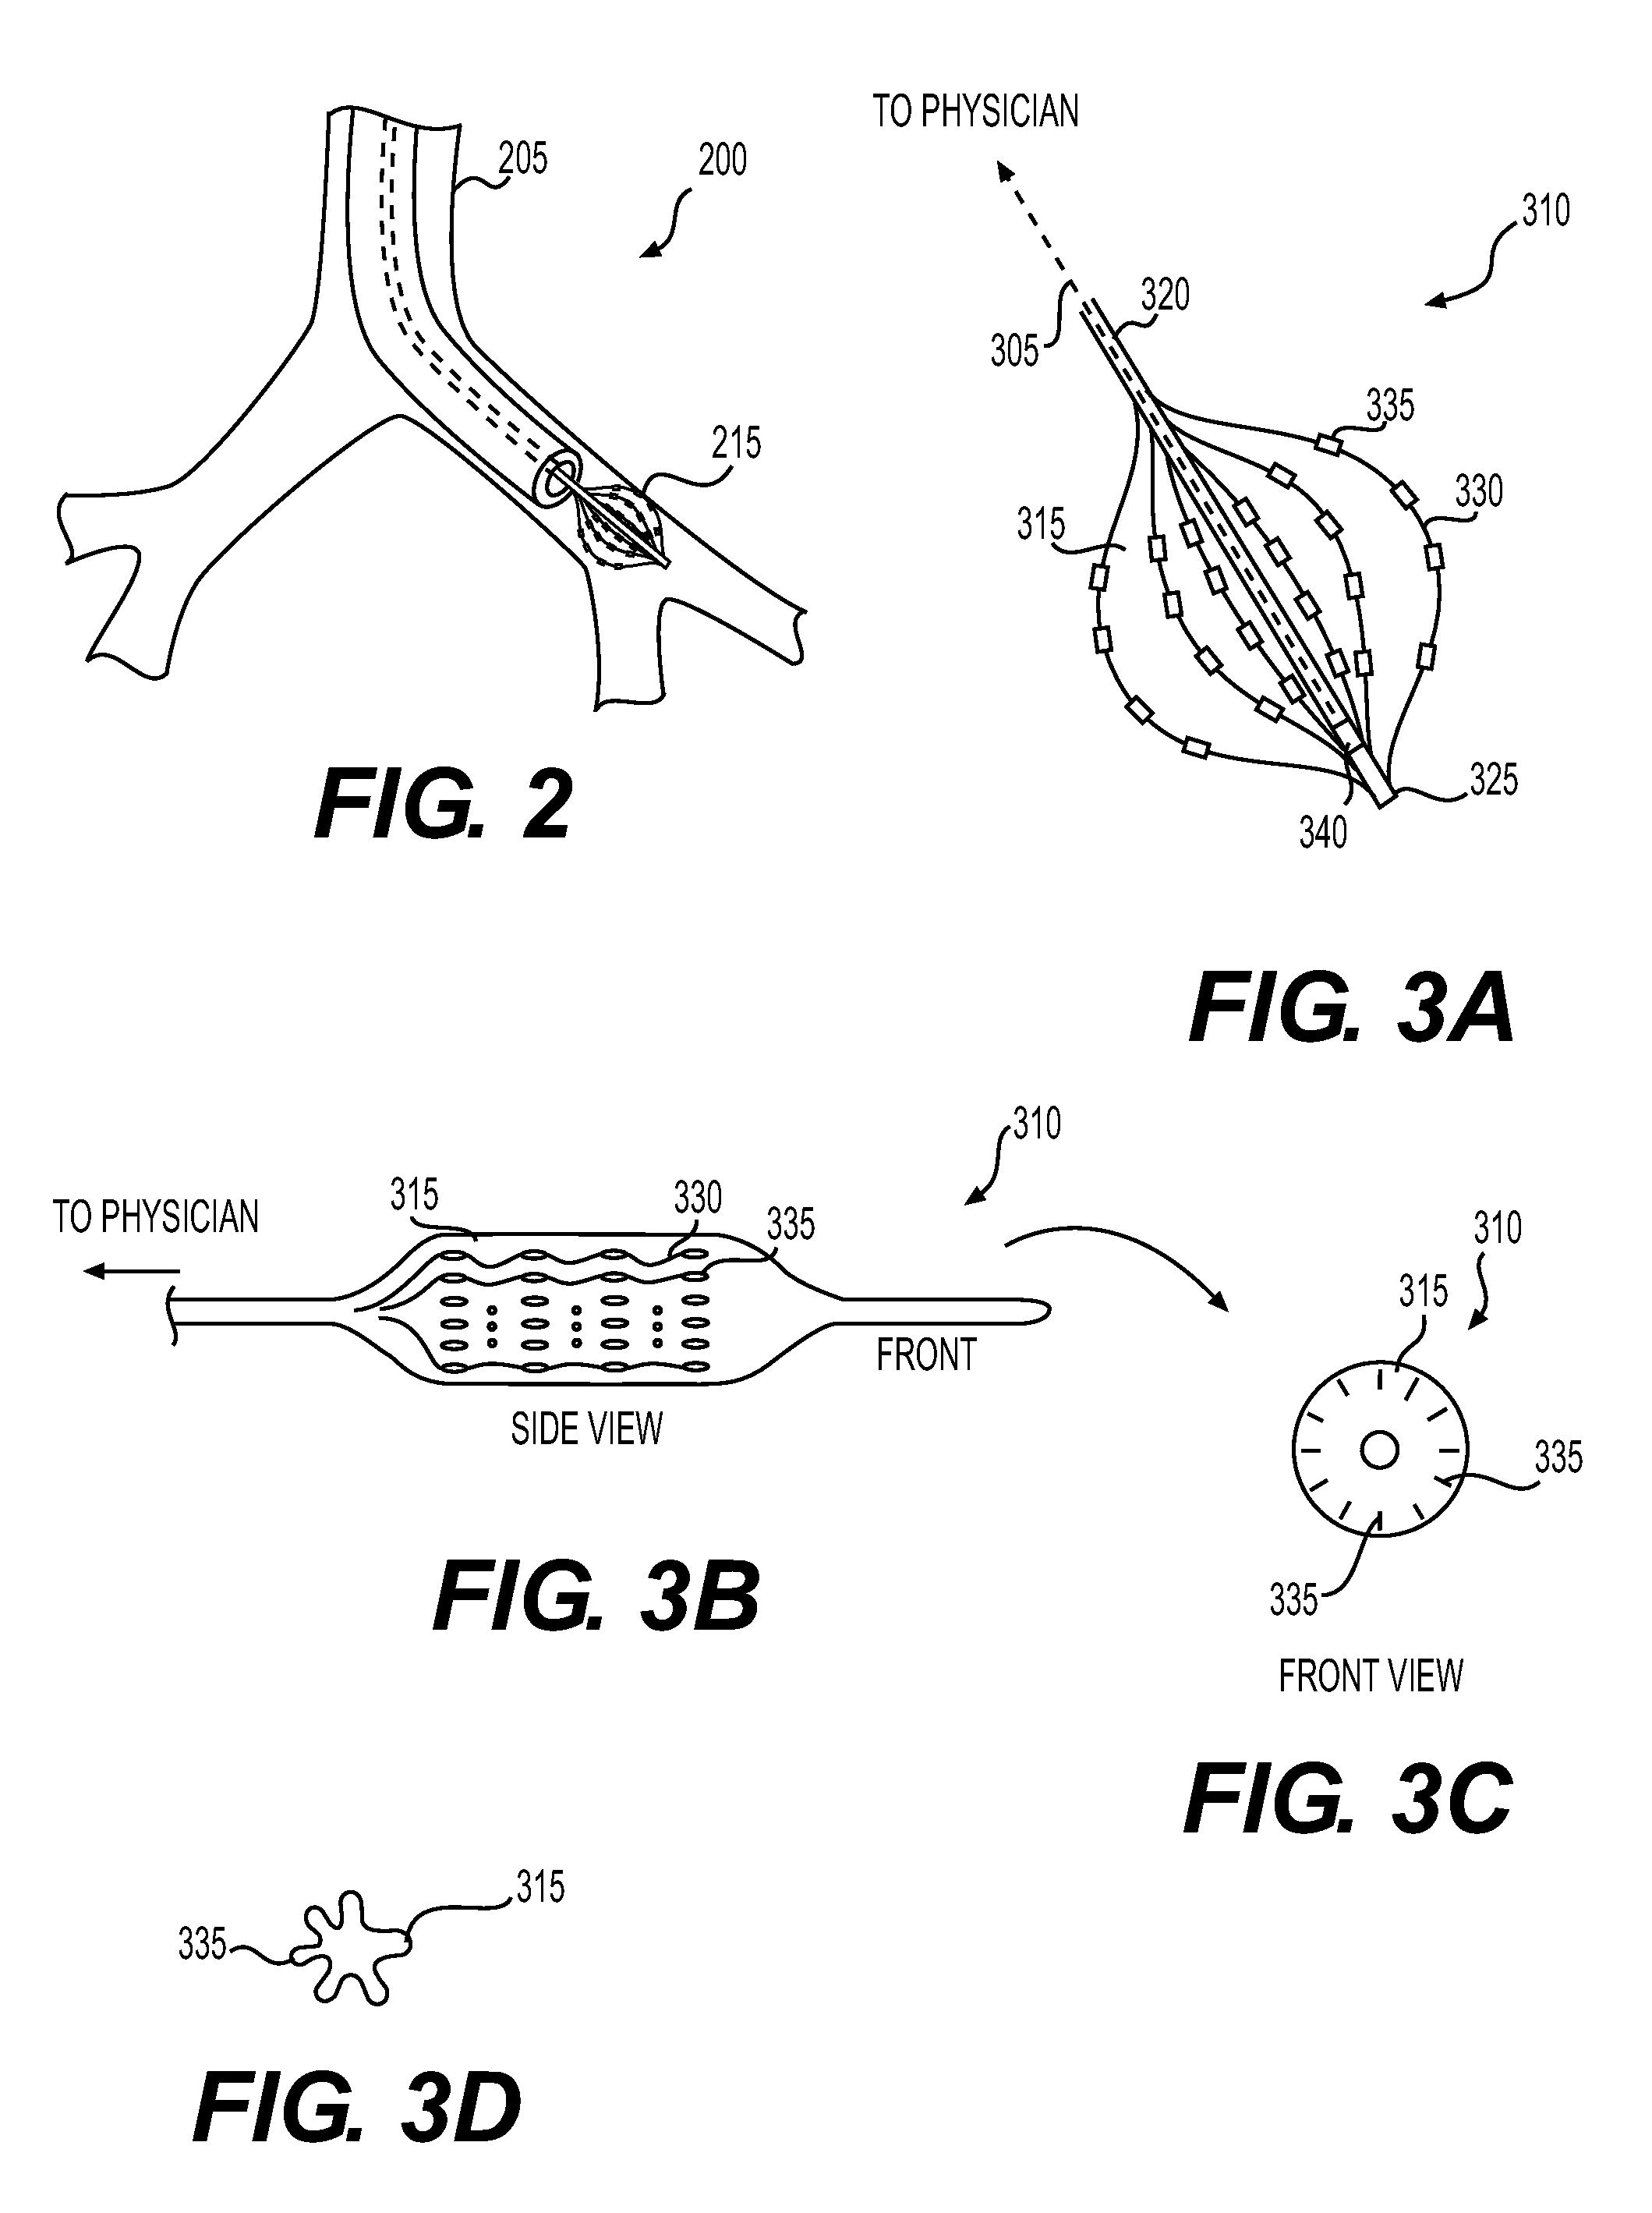 Systems and methods for assessing and treating tissue